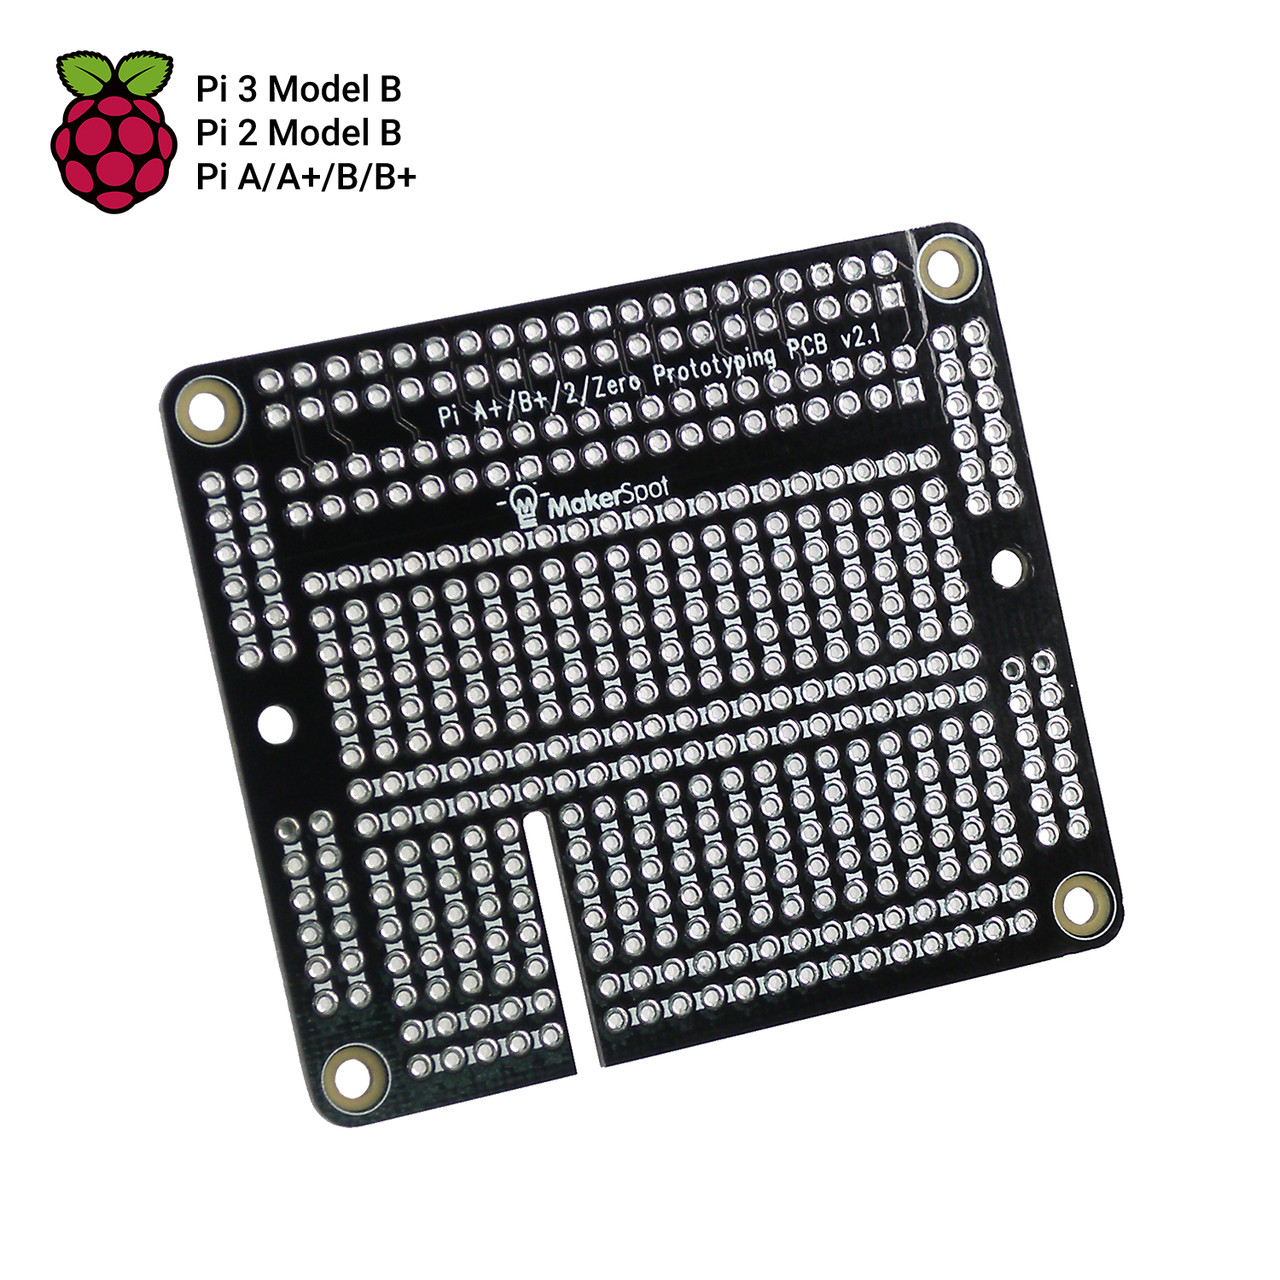 Rk Education Breadboard for Prototyping Pack of 1-830 tie points clear Great for Arduino and Raspberry PI